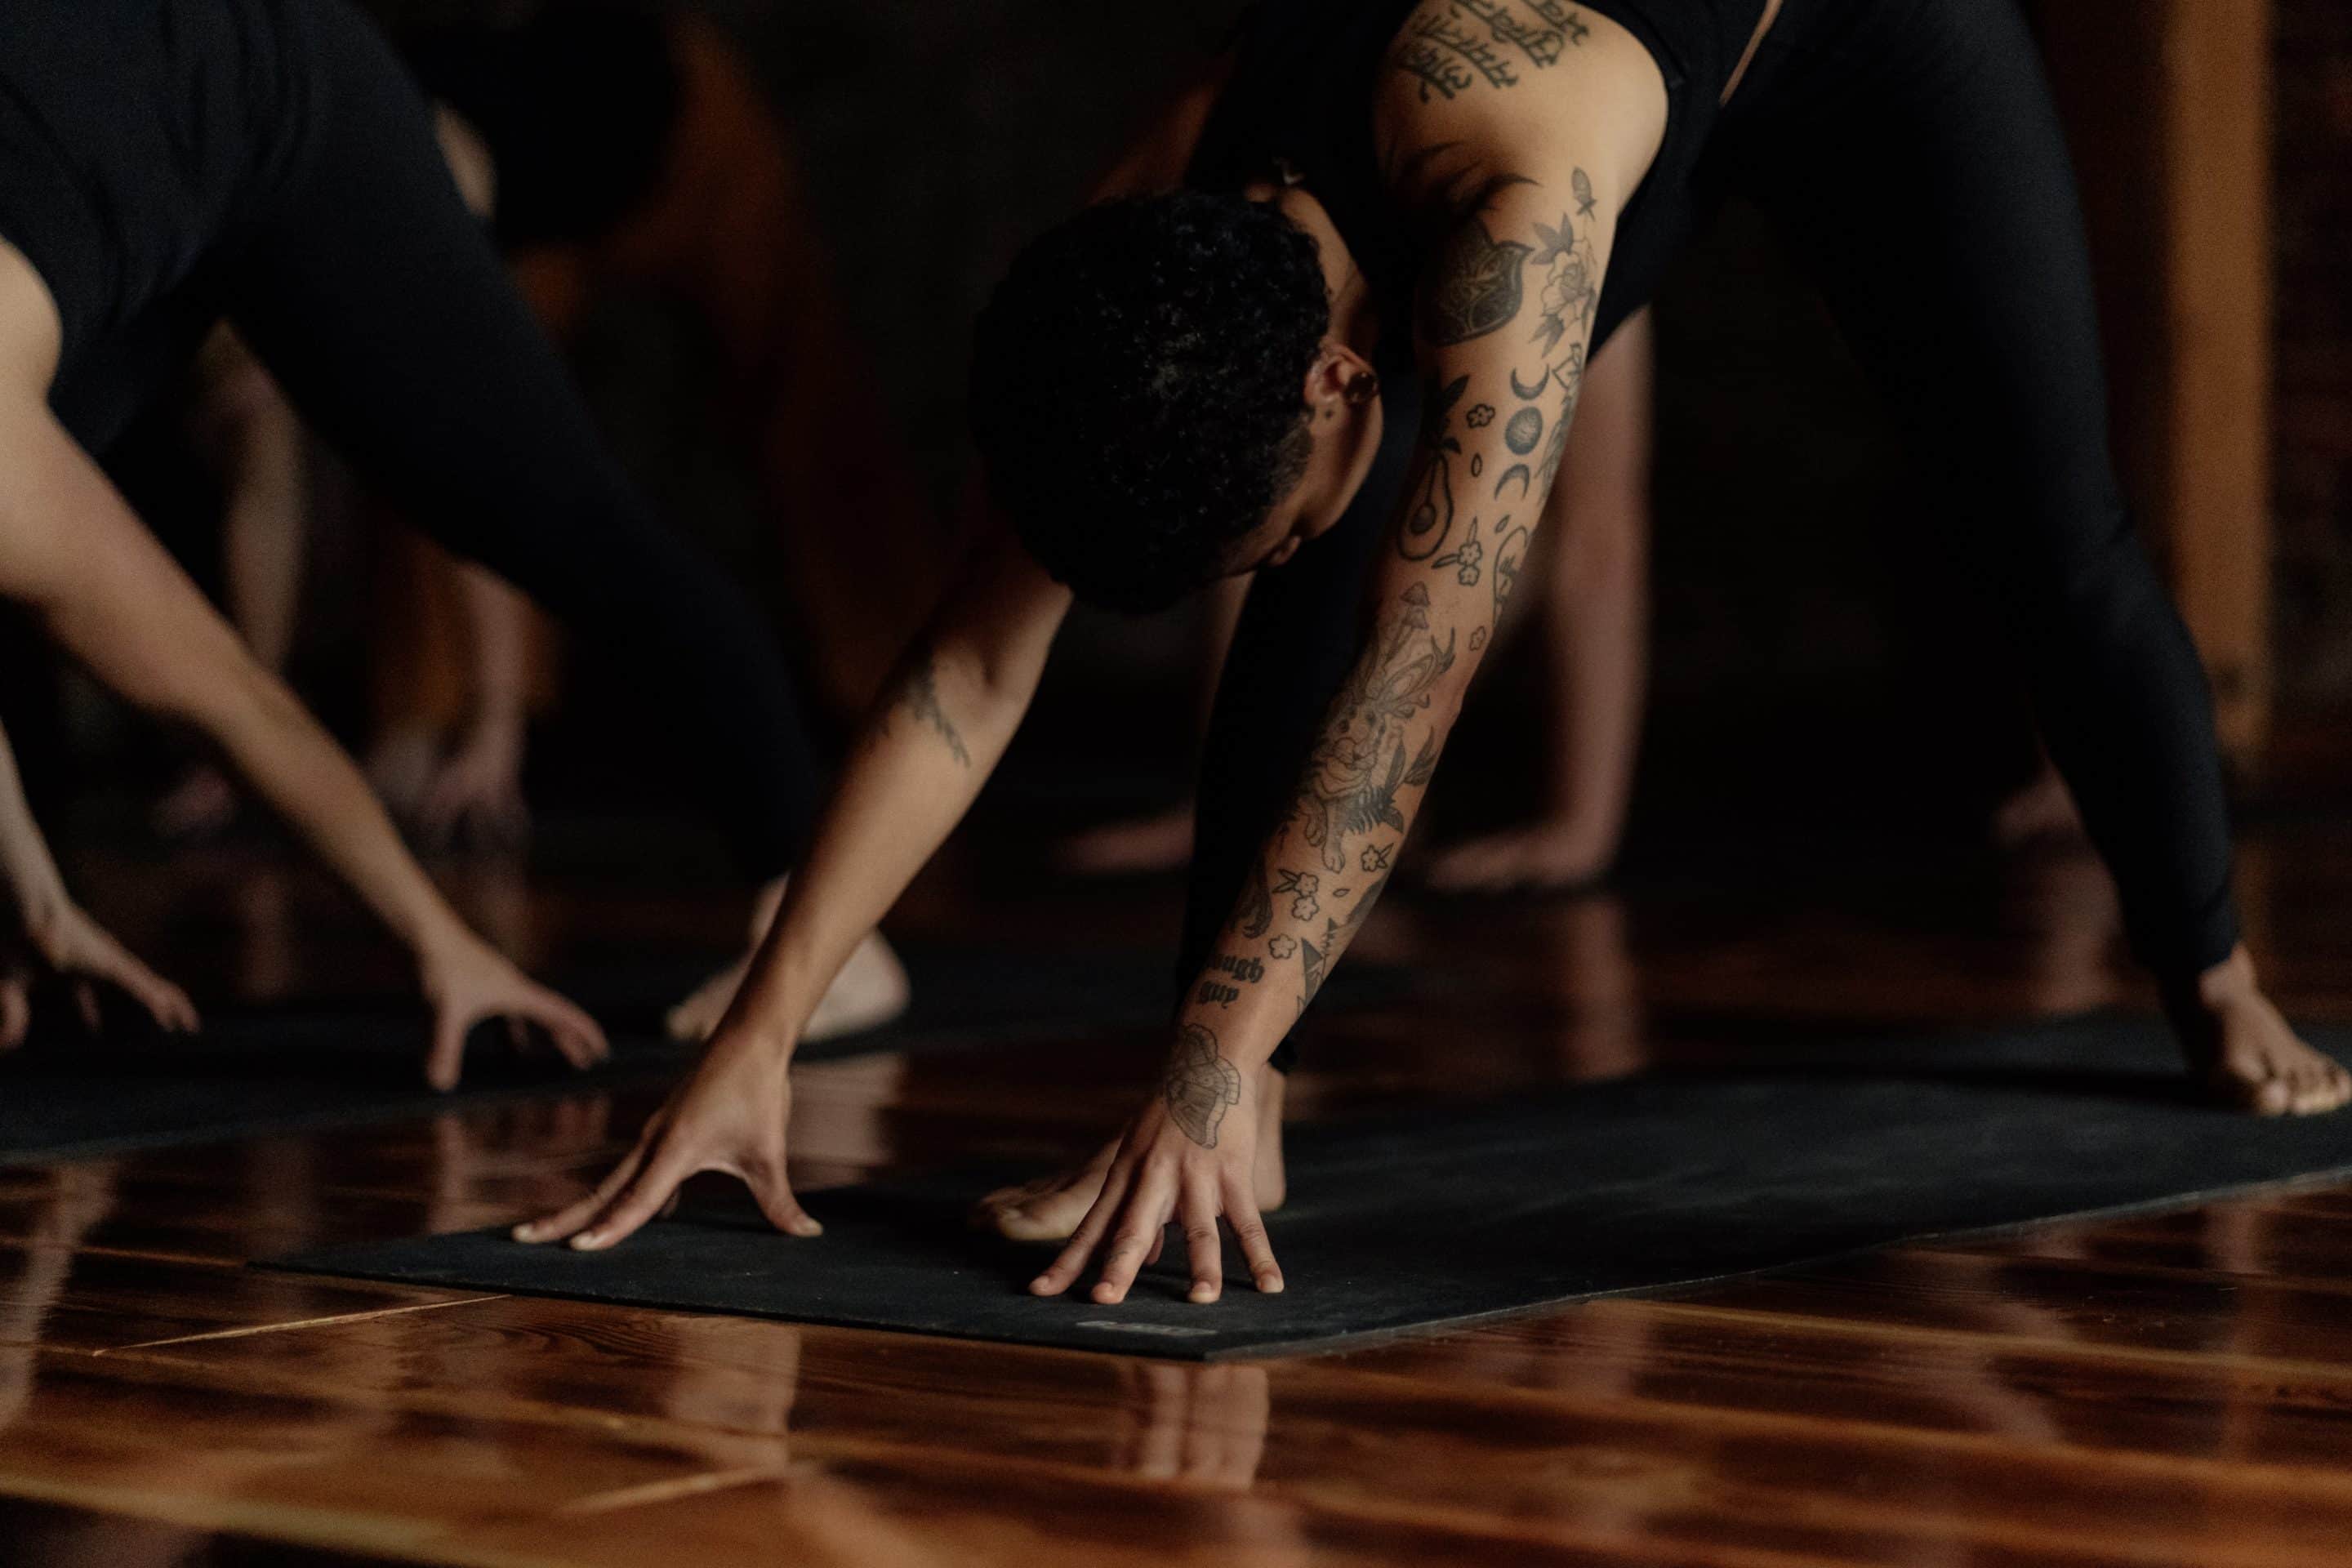 A woman with tattoos doing the Downward Dog pose during yoga practice.